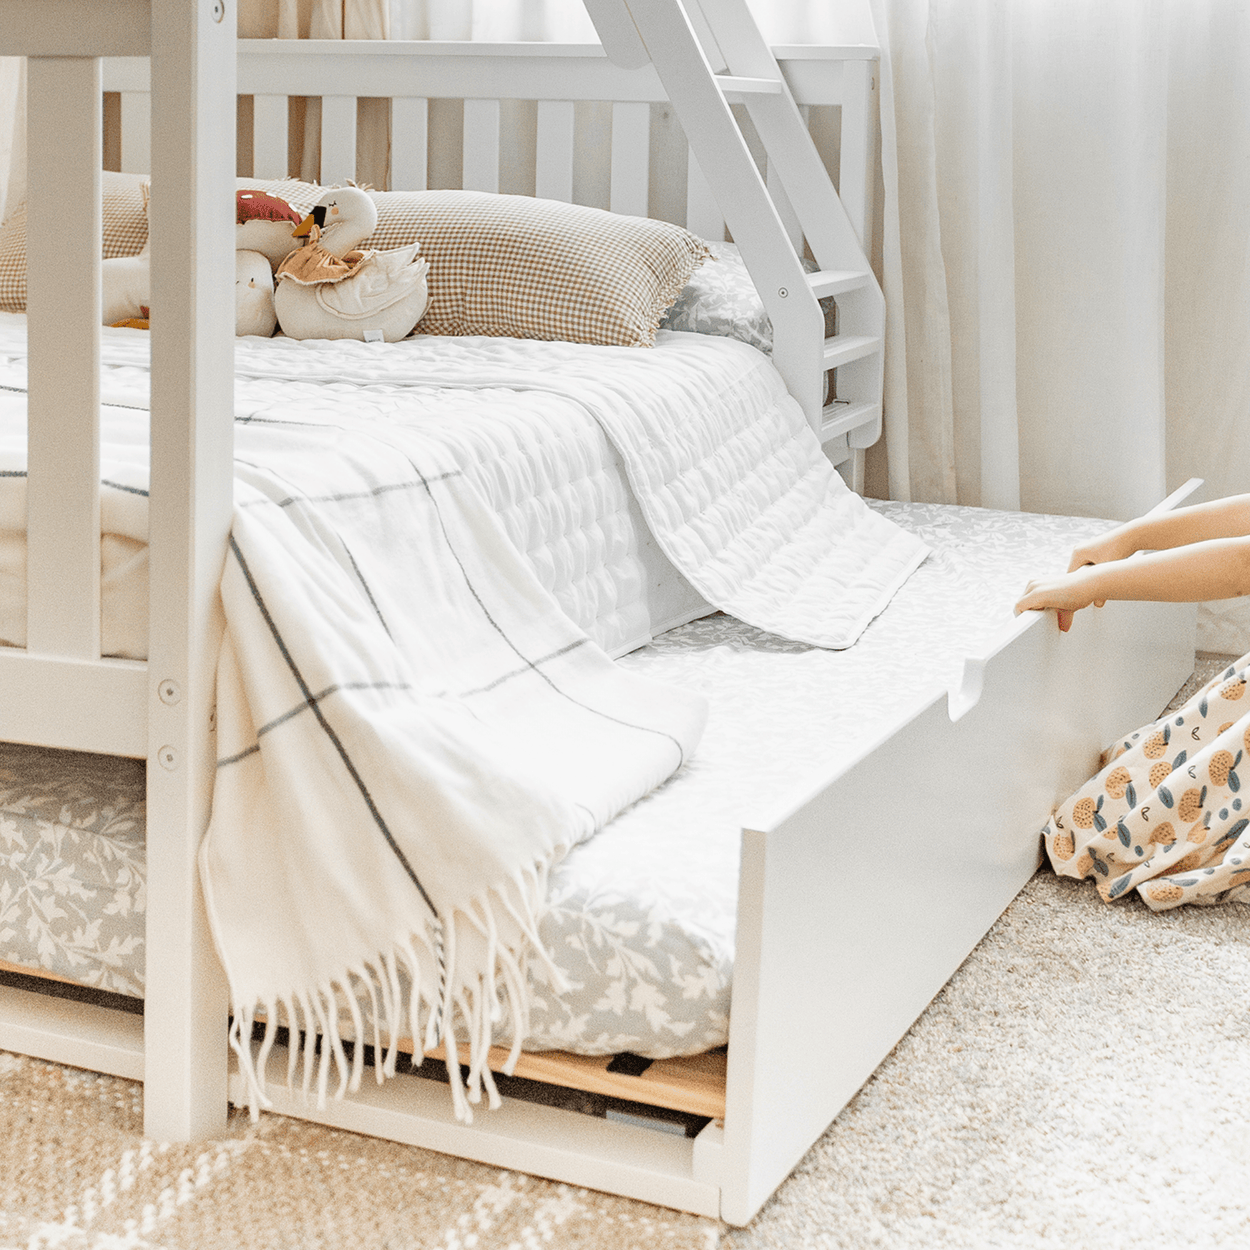 186231-002 : Bunk Beds Classic Twin over Full Bunk Bed with Trundle, White